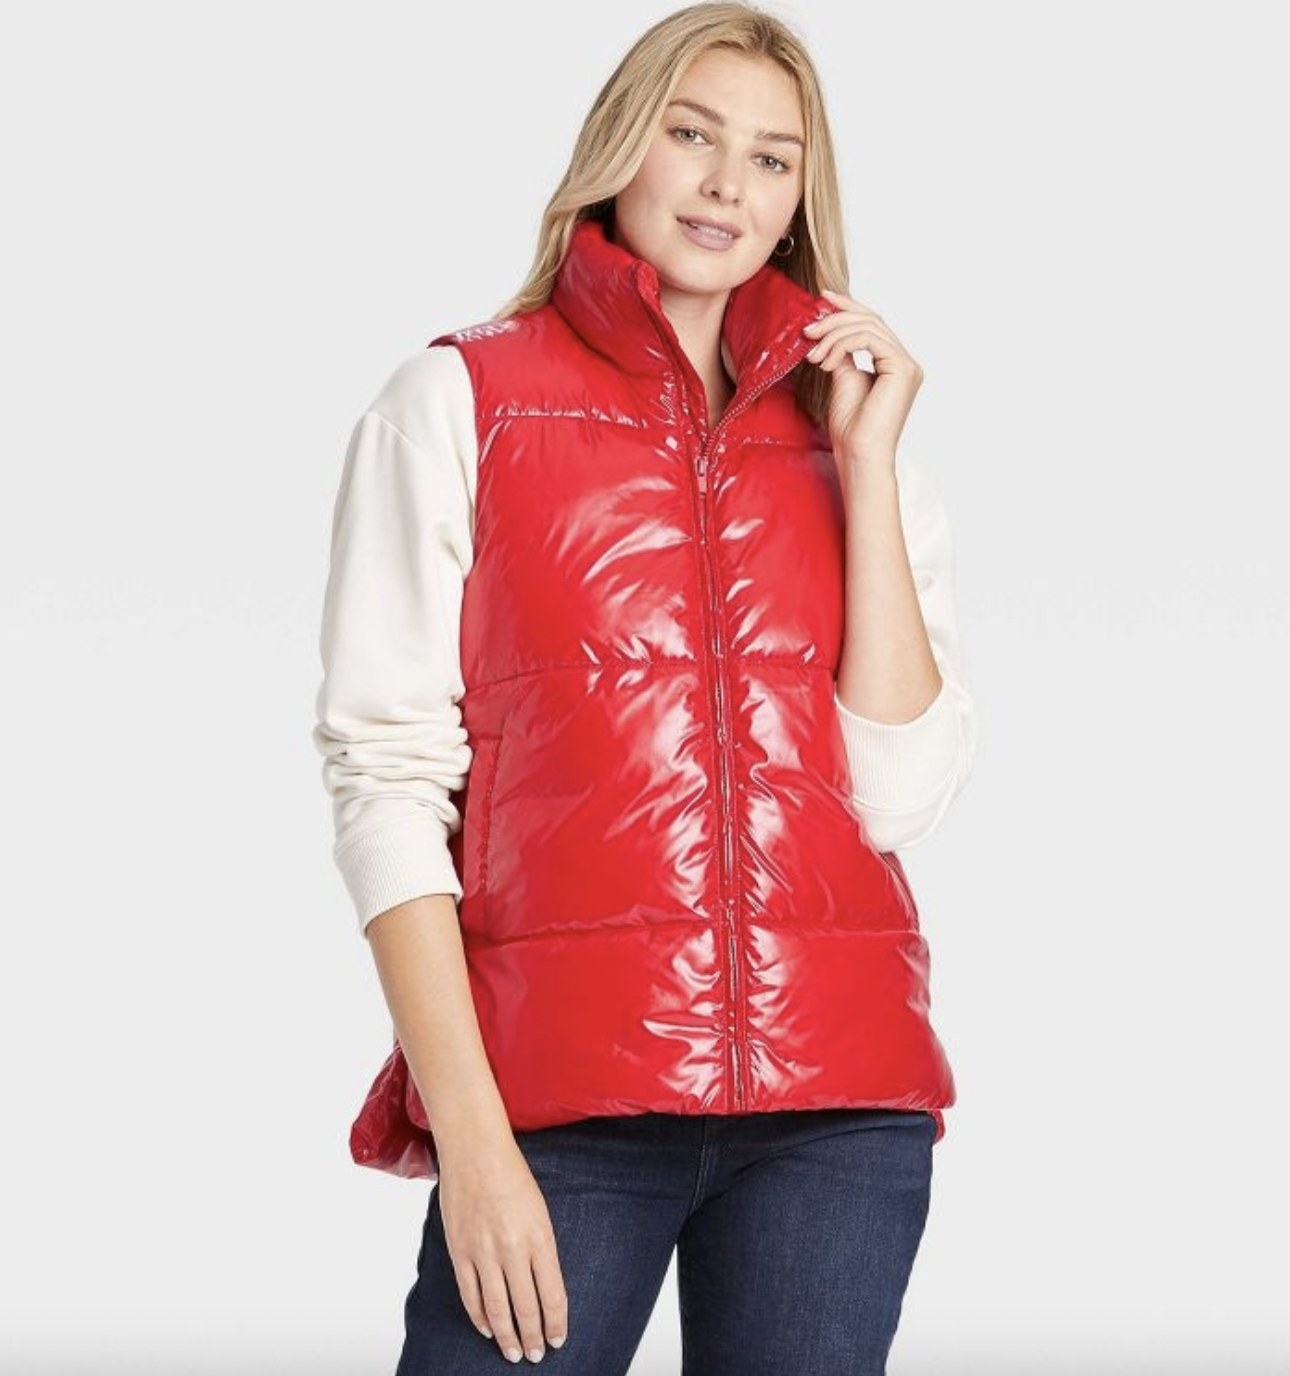 A person wearing a red puffer vest